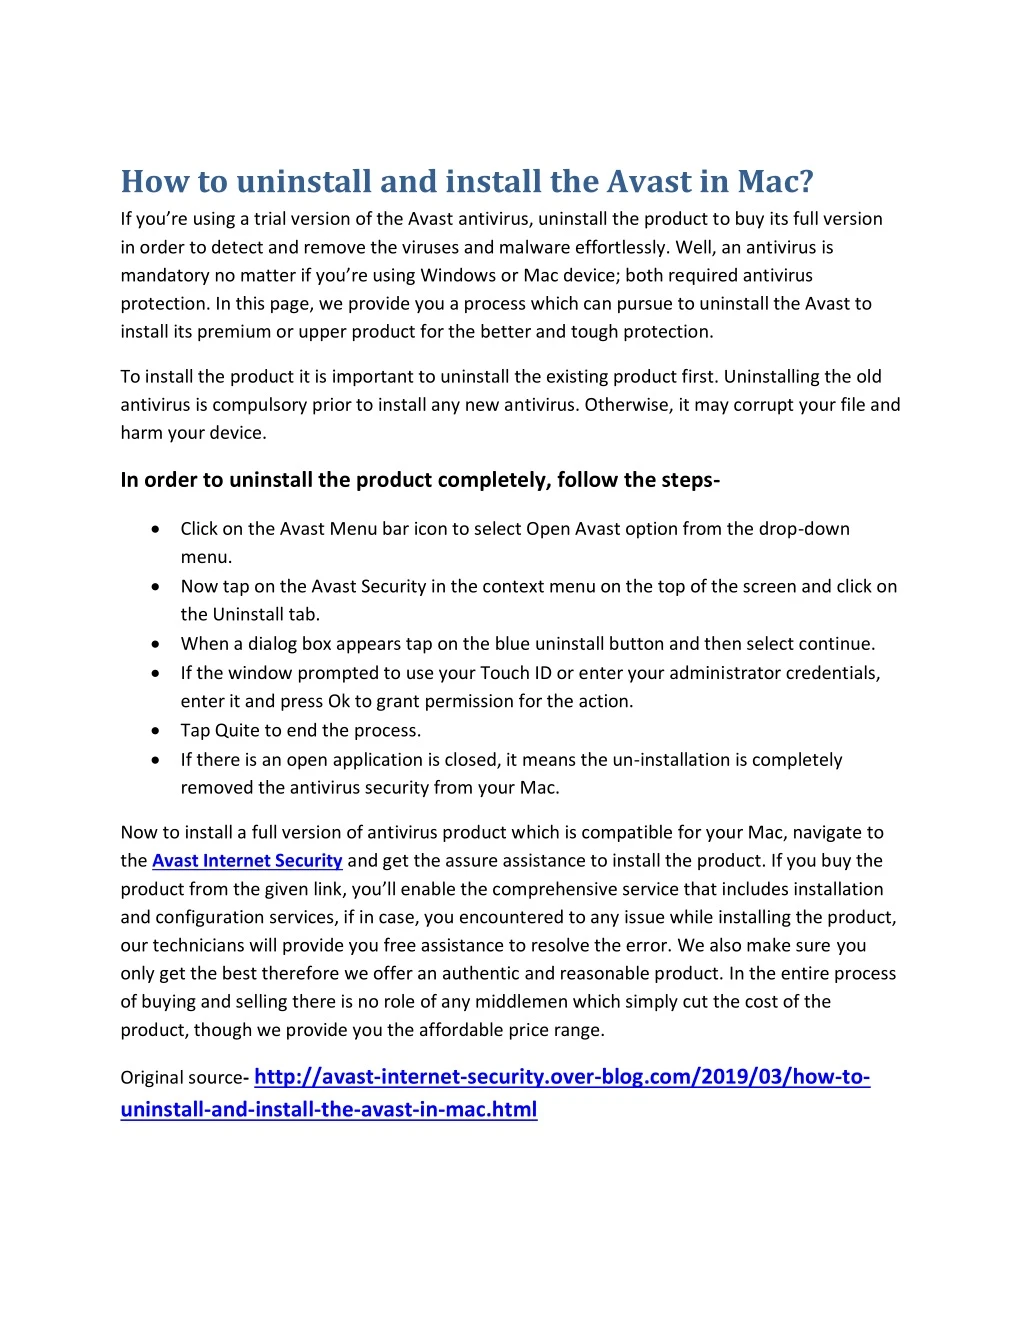 how to uninstall and install the avast in mac